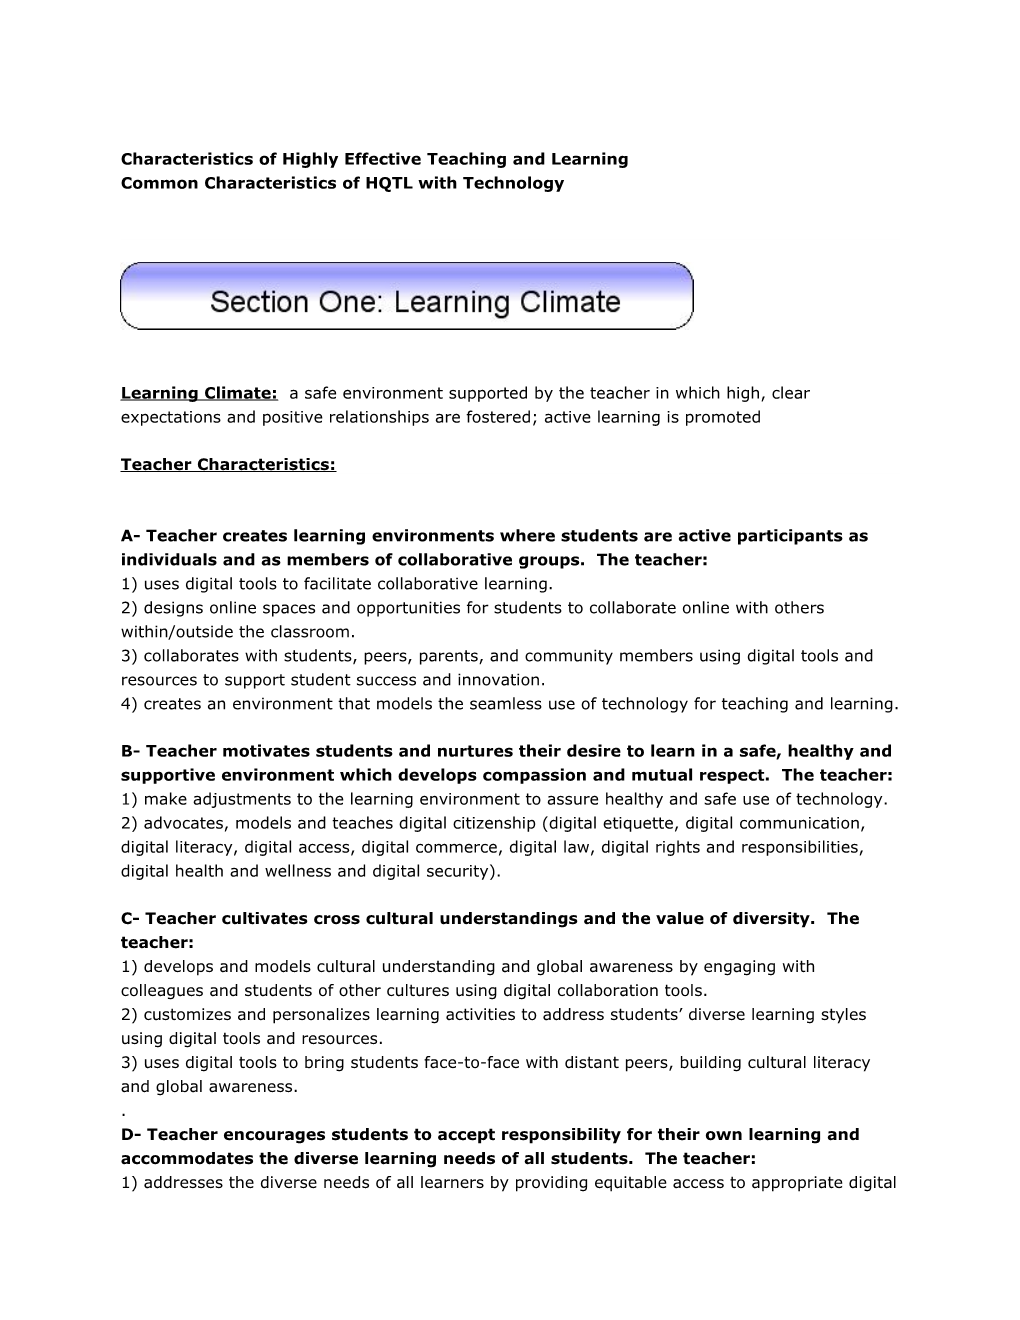 Characteristics of Highly Effectiveteaching and Learning Common Characteristics of HQTL